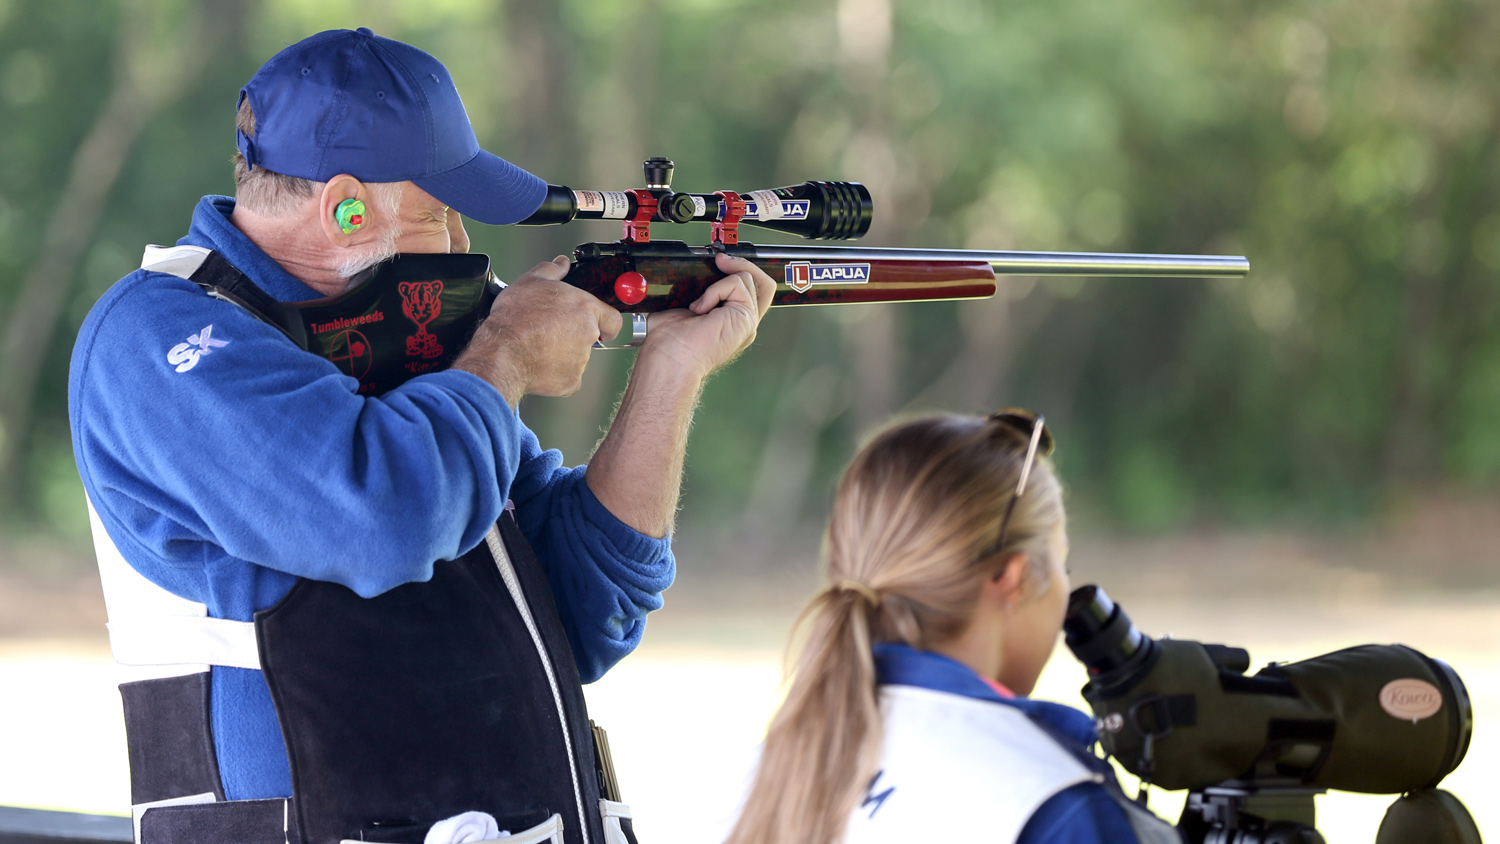 Modern-day smallbore rifle silhouette shooter and spotter